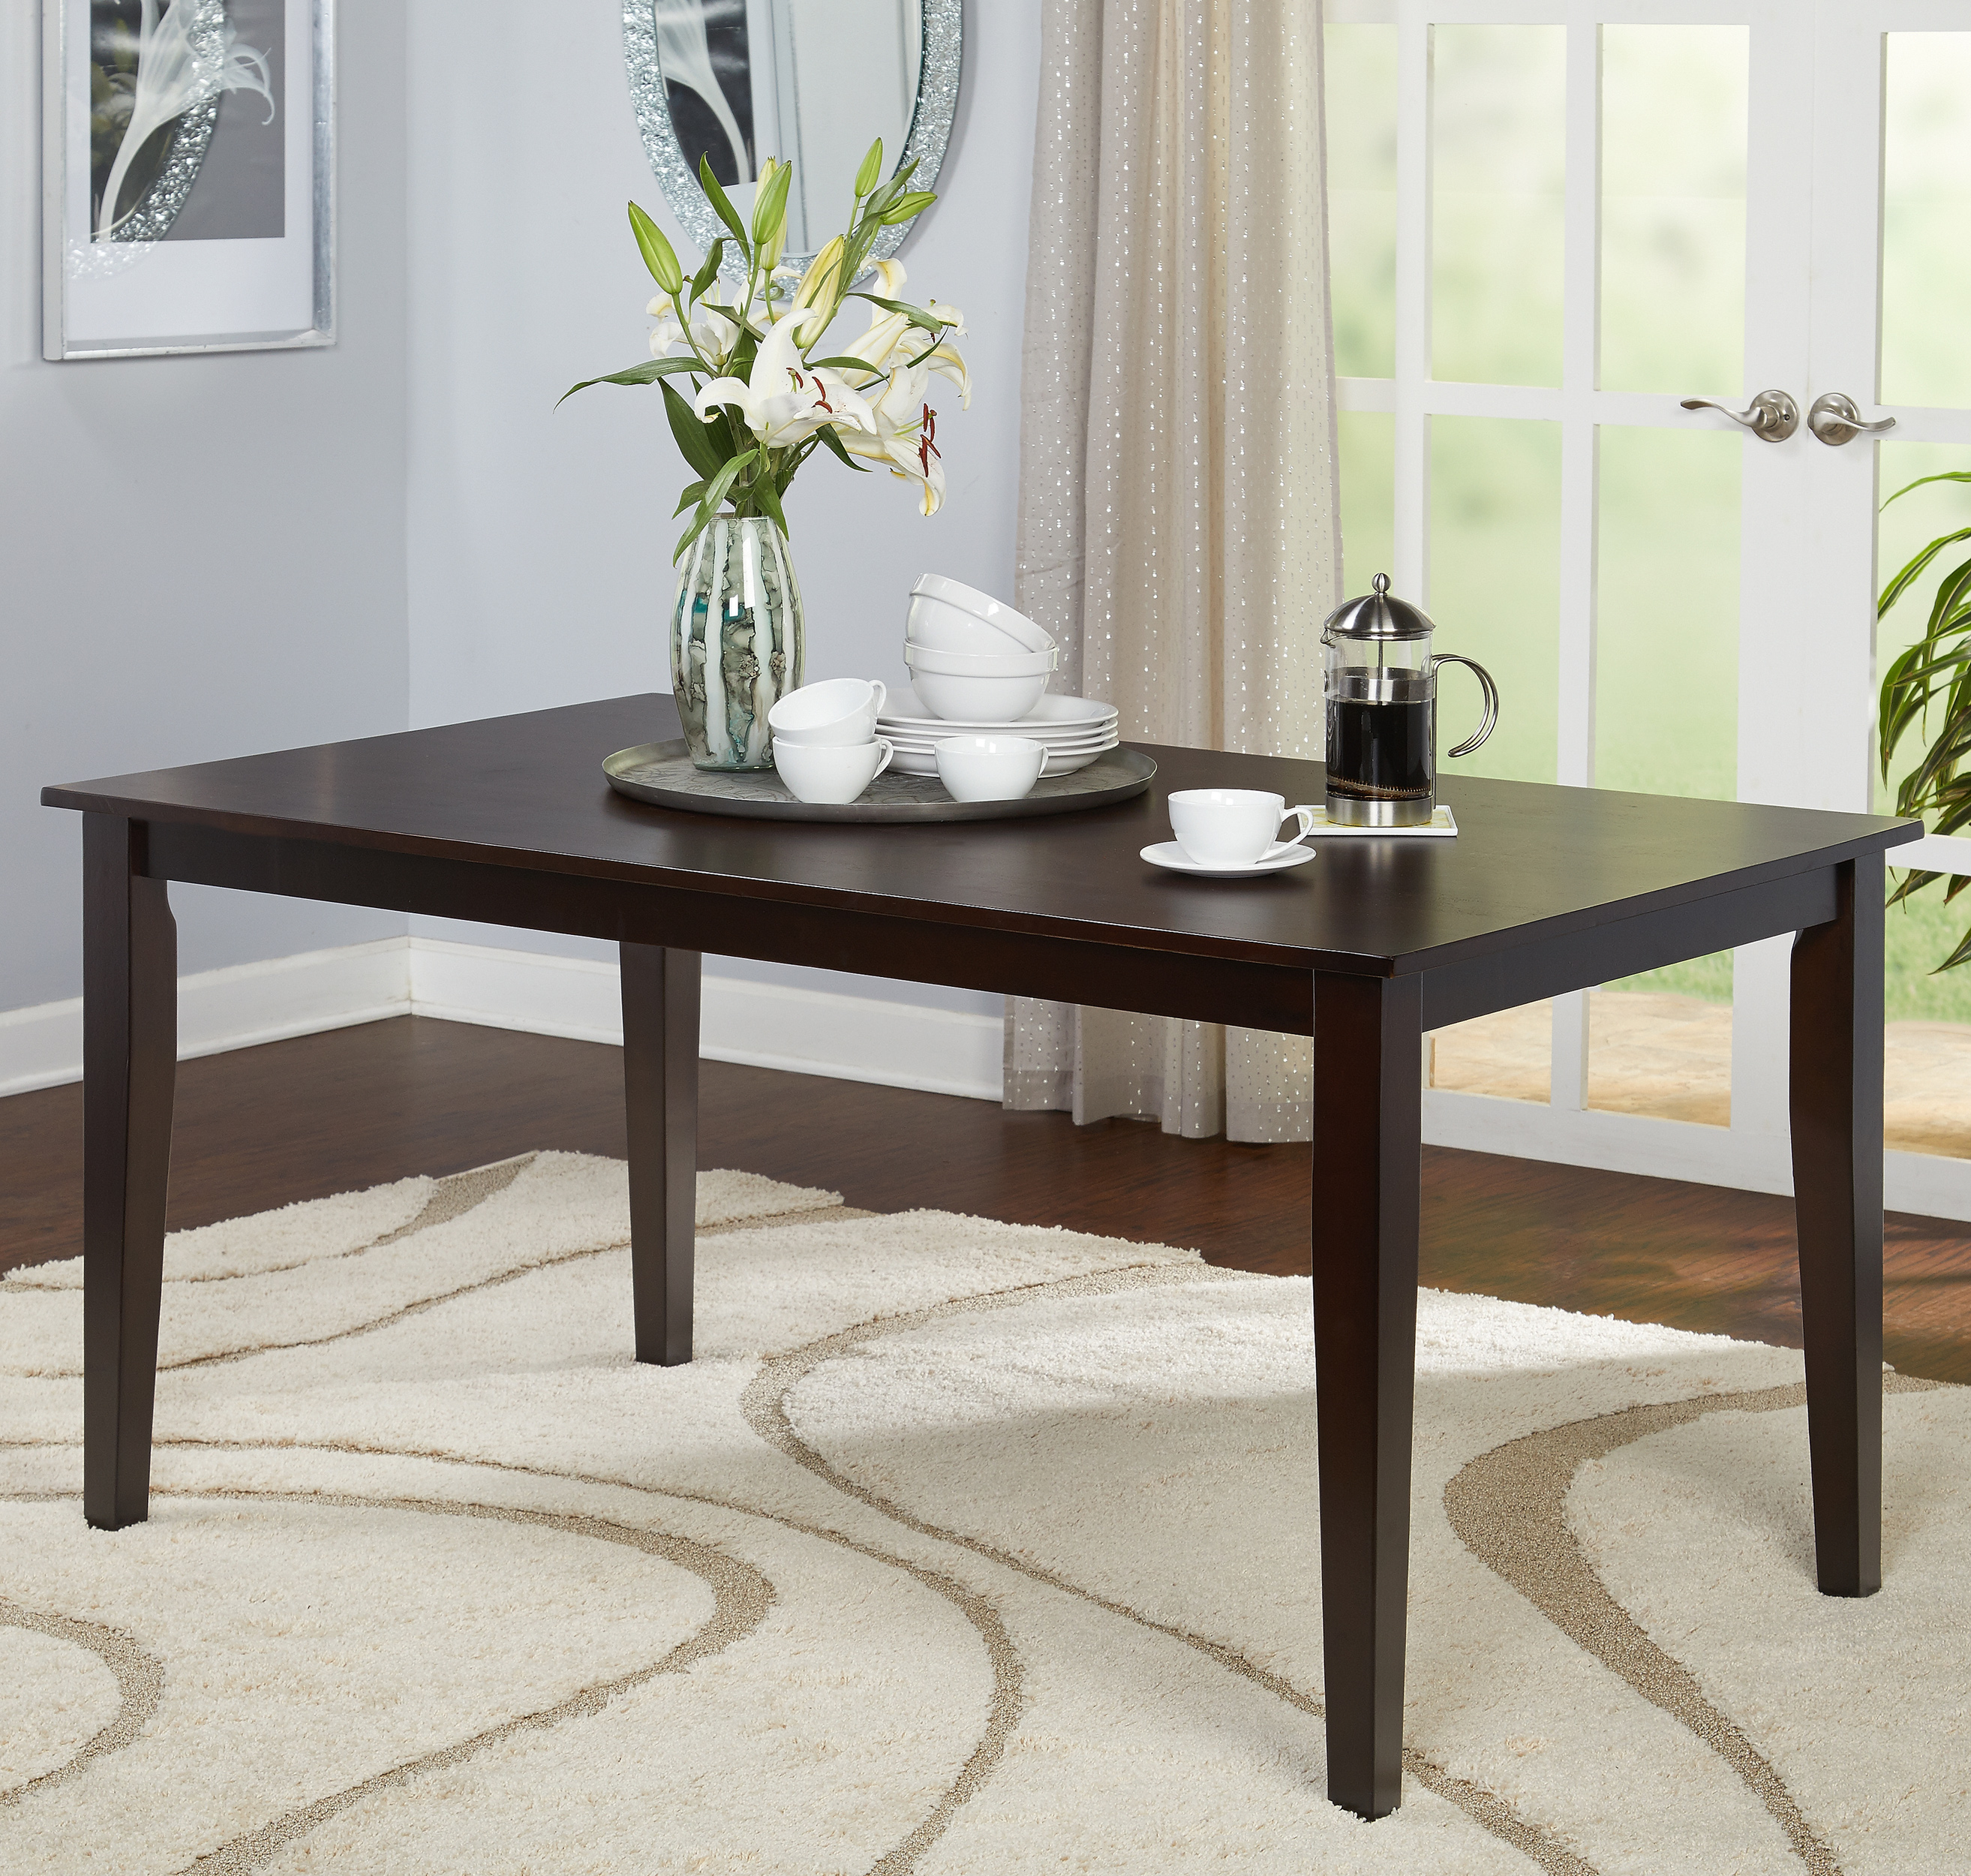 TMS Mid-Century 60" Indoor Dining Table, Espresso - image 5 of 6